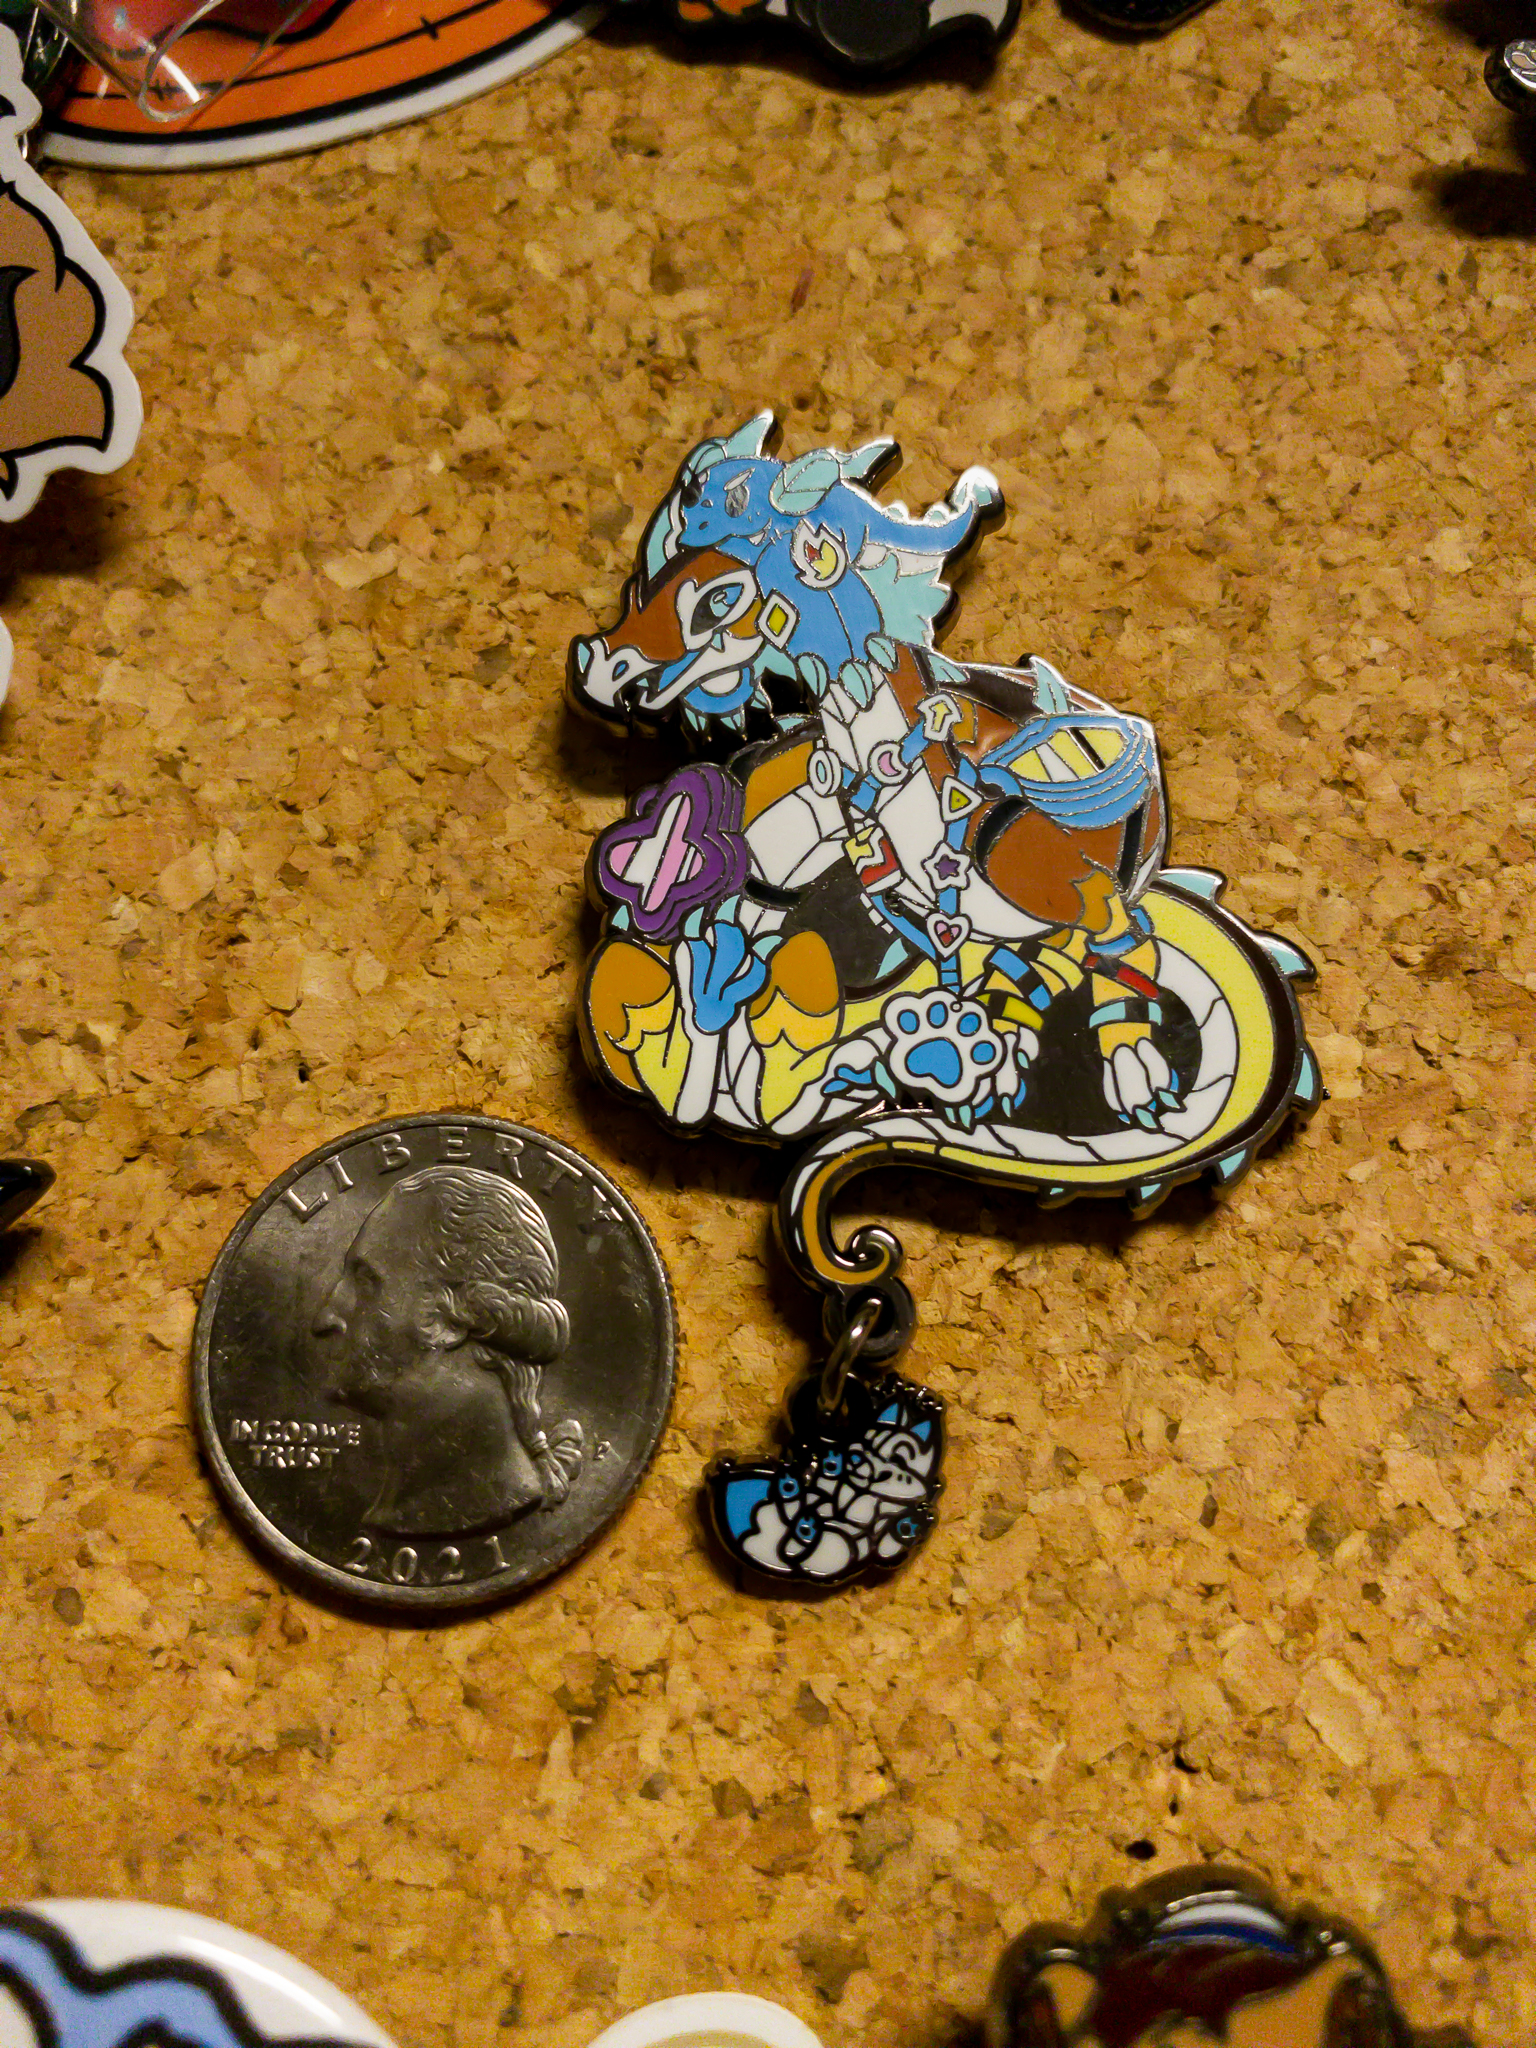 The pin's size, compared to a quarter (1 inch/25 mm)